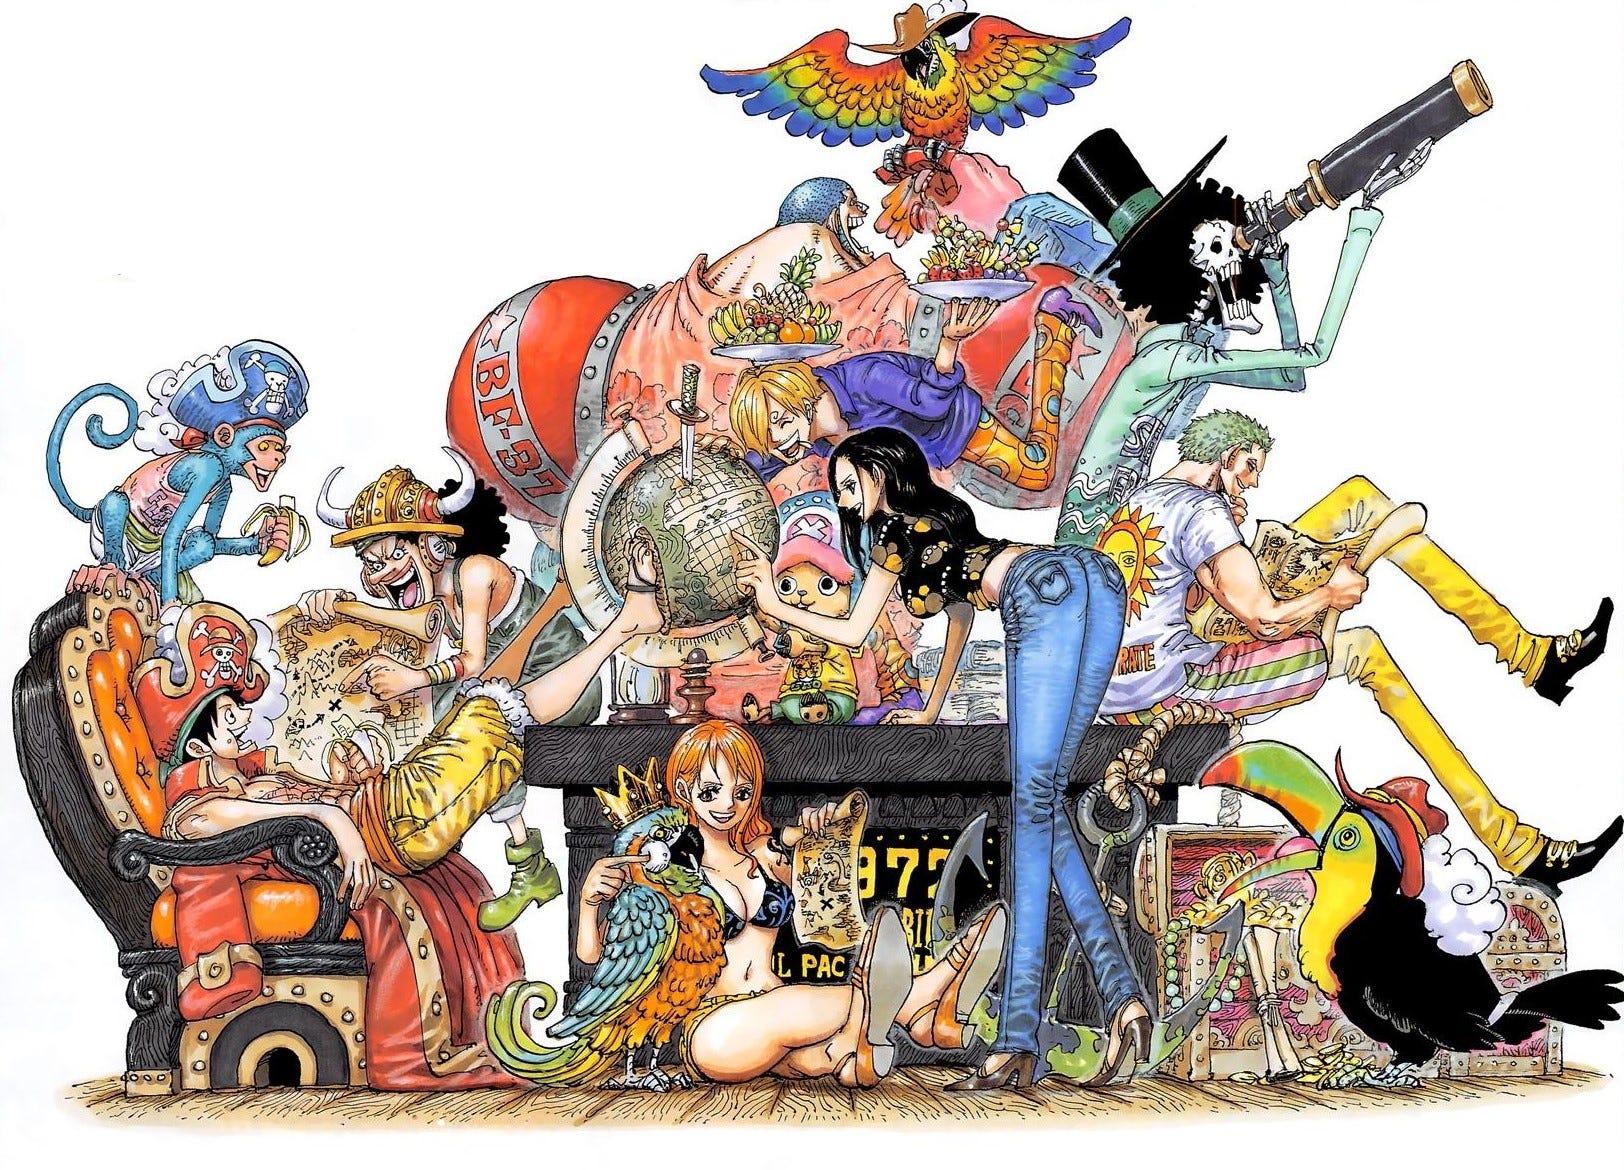 Tags: ONE PIECE, Monkey D. Luffy, Straw Hat Pirates, One Piece: Two Years  Later